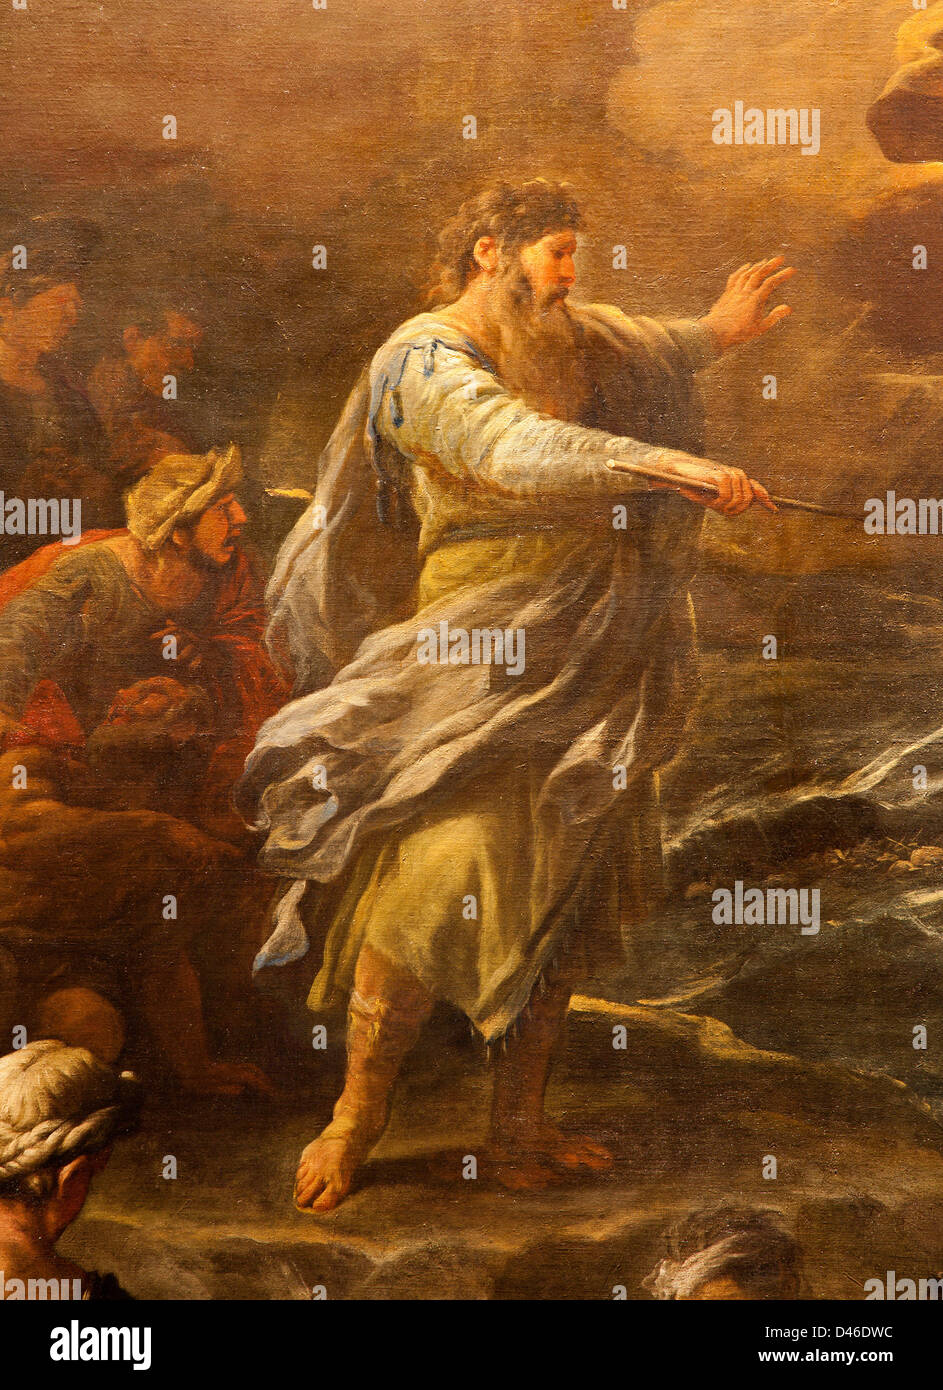 BERGAMO - JANUARY 26: Moses from paint 'Passaggio del Mar Rosso' by Luca Giordano. Crossing the Red sea Stock Photo